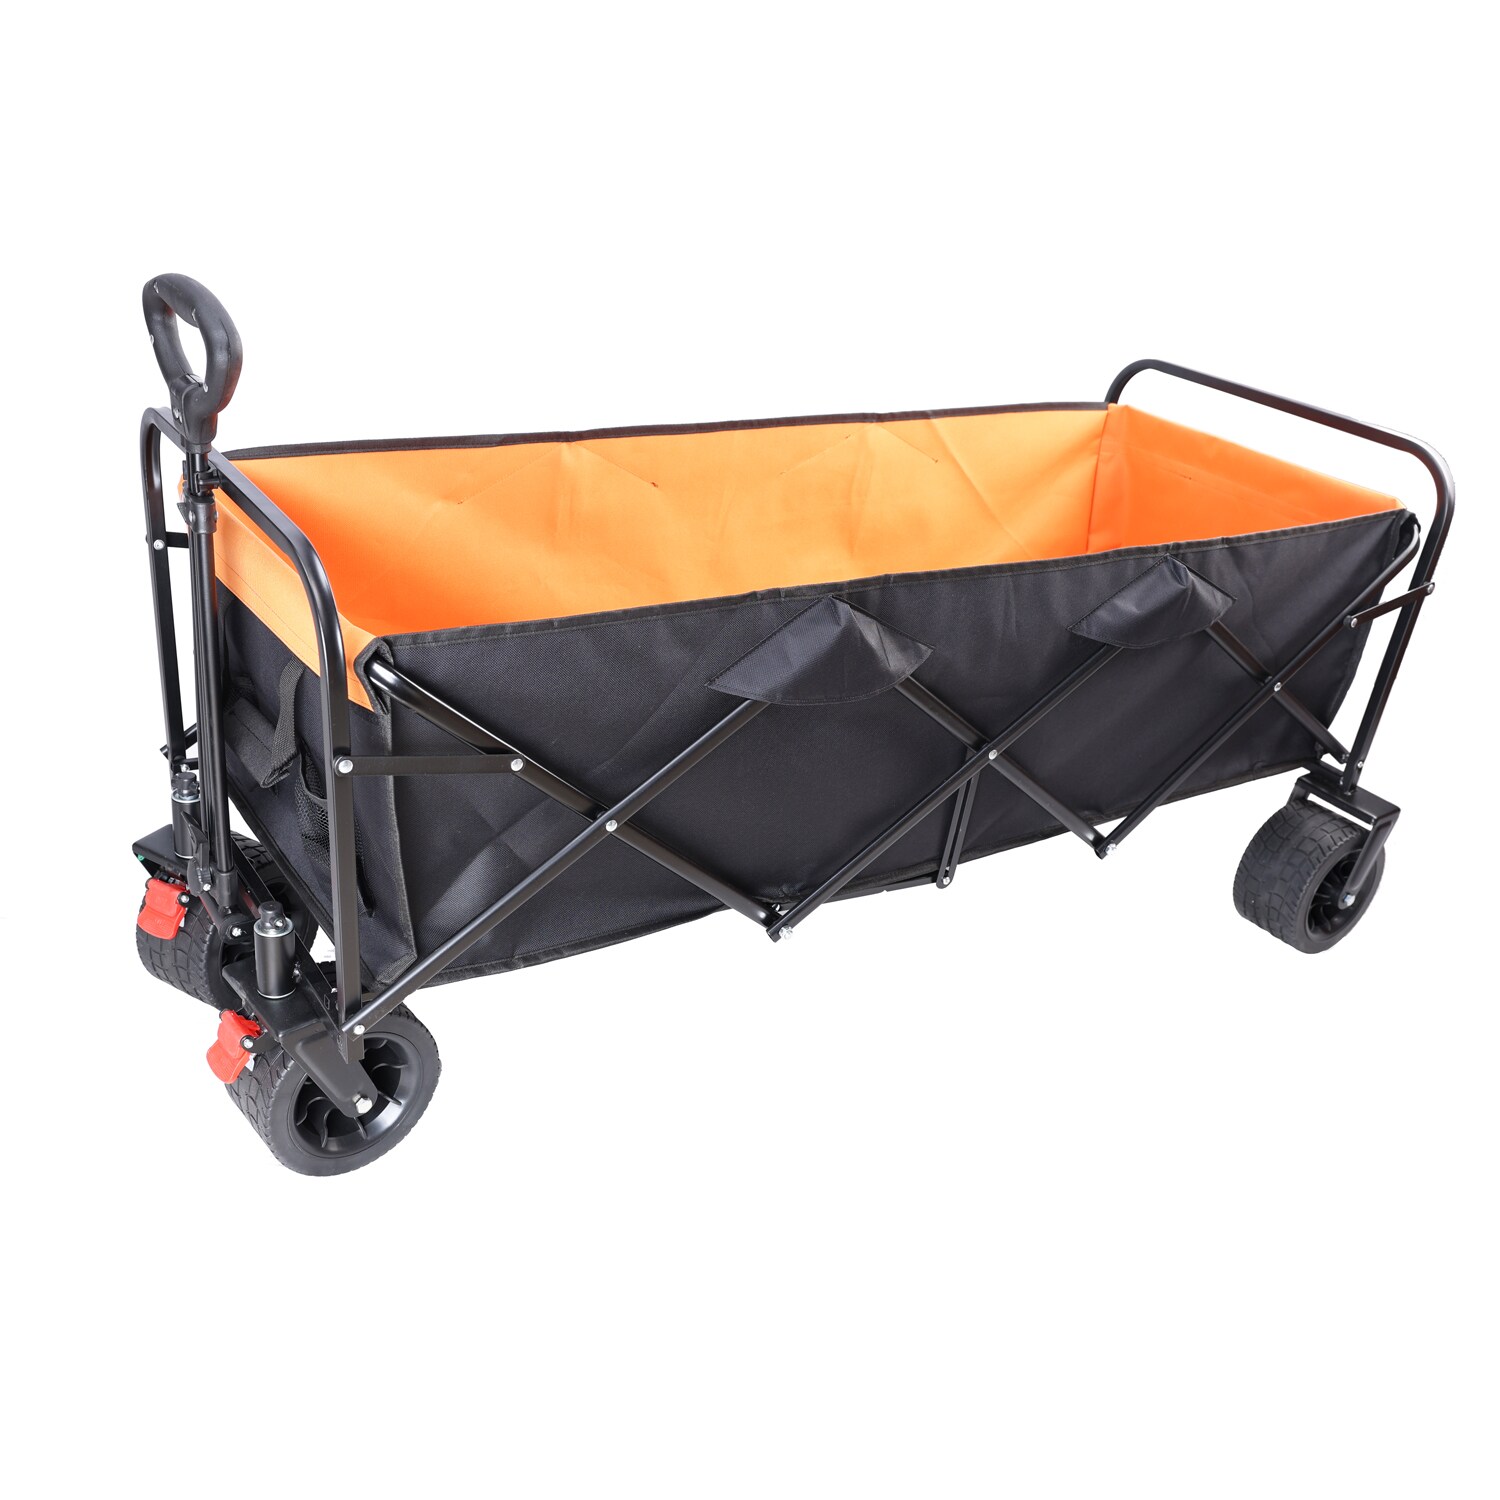 VEVOR Wagon Beach Cart, Collapsible Folding Cart with 176lbs Load